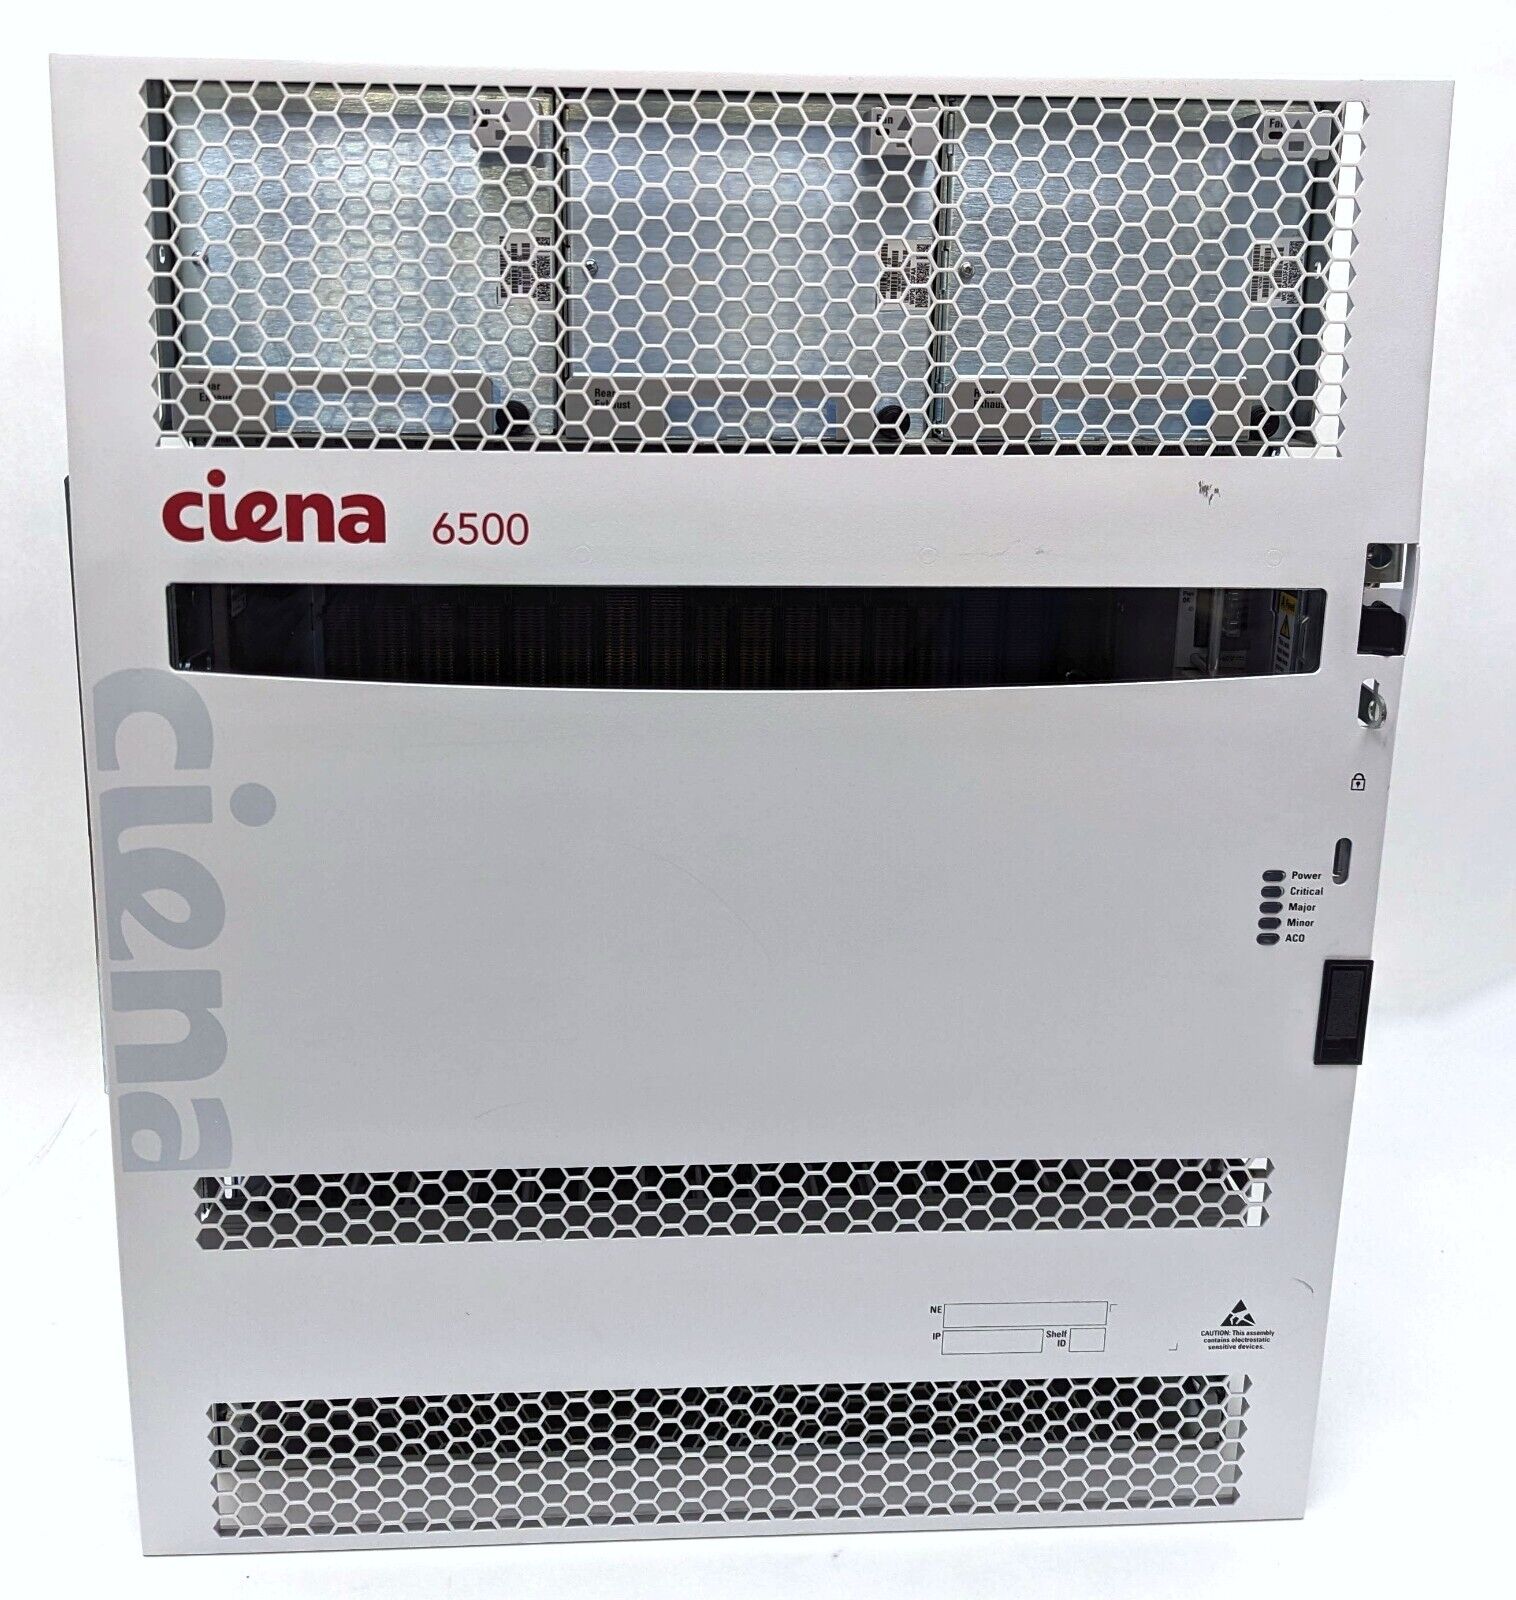 Ciena 6500 17-Slot Chassis WOM1R00GRB with Power Module & Fans - Working Pull